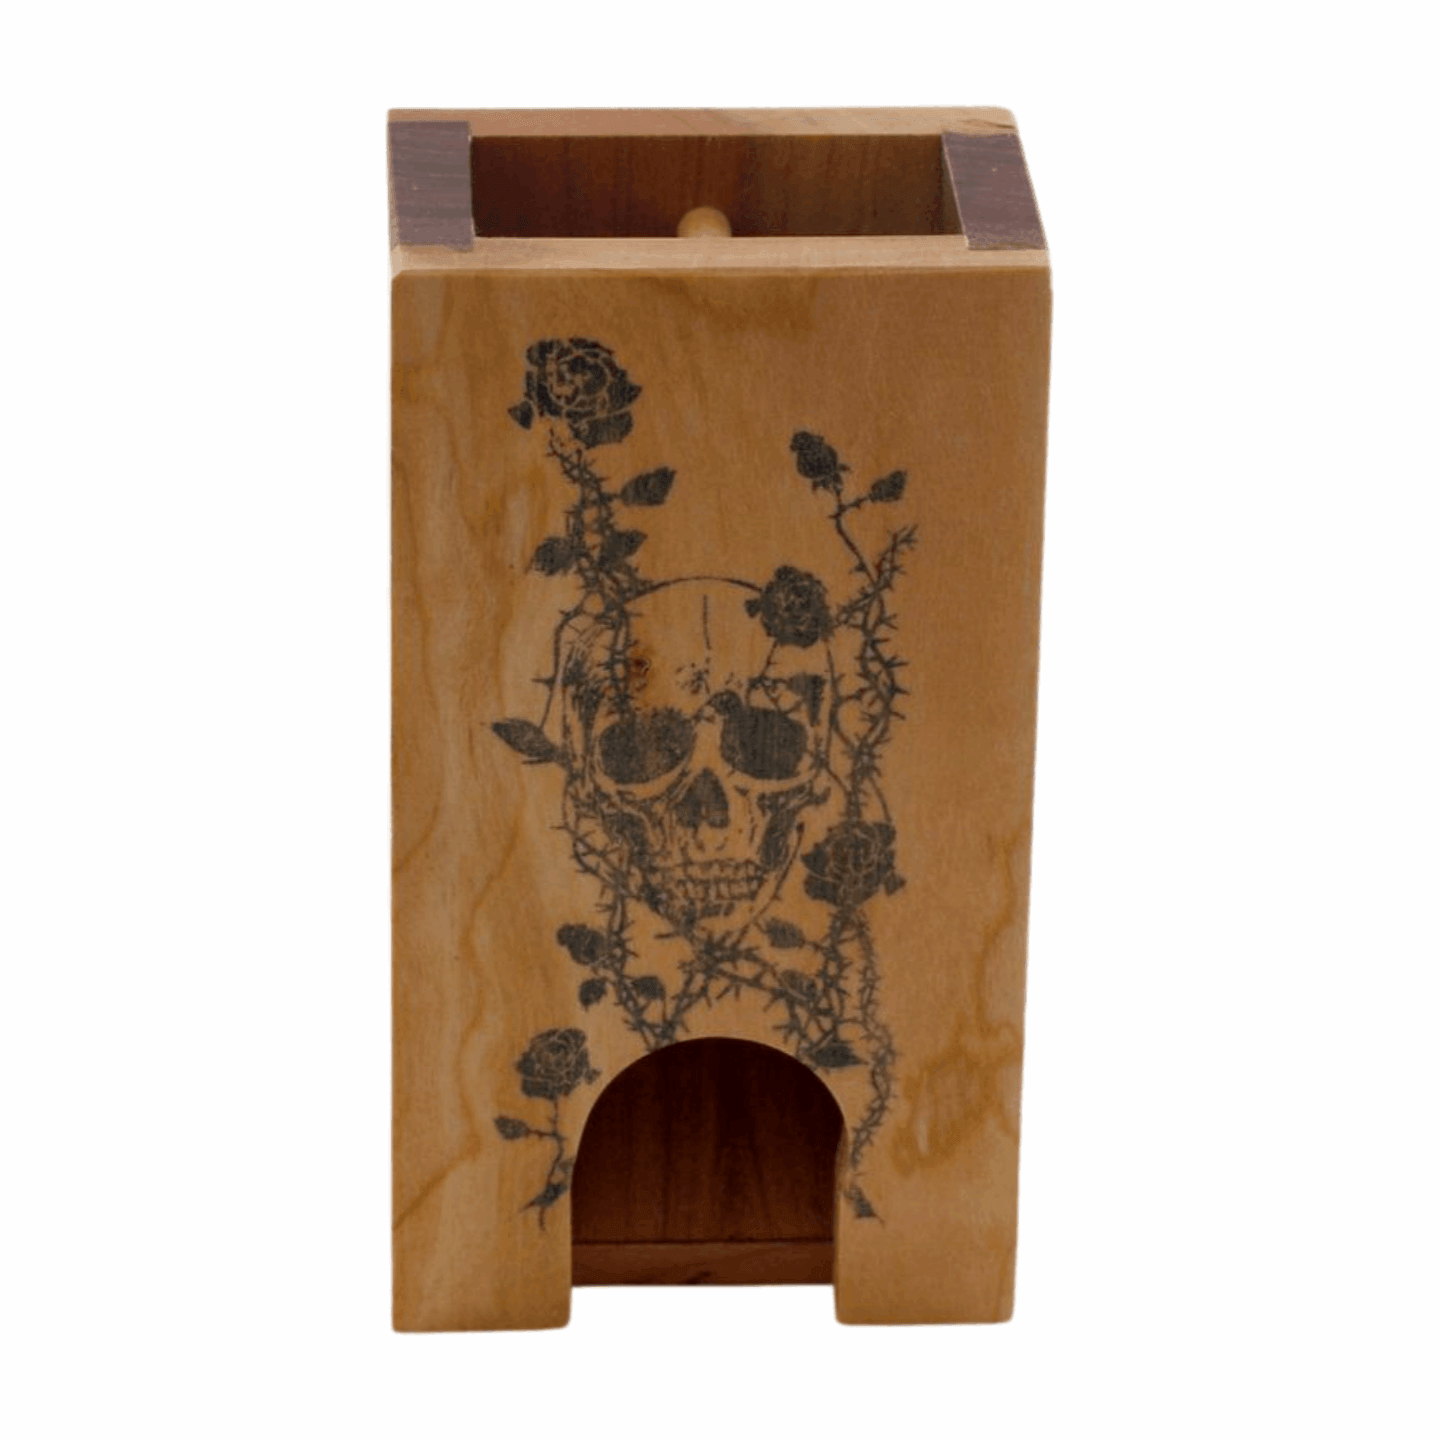 Small Cherry and Walnut Dice Tower with Skull and Roses - Dragon Armor Games